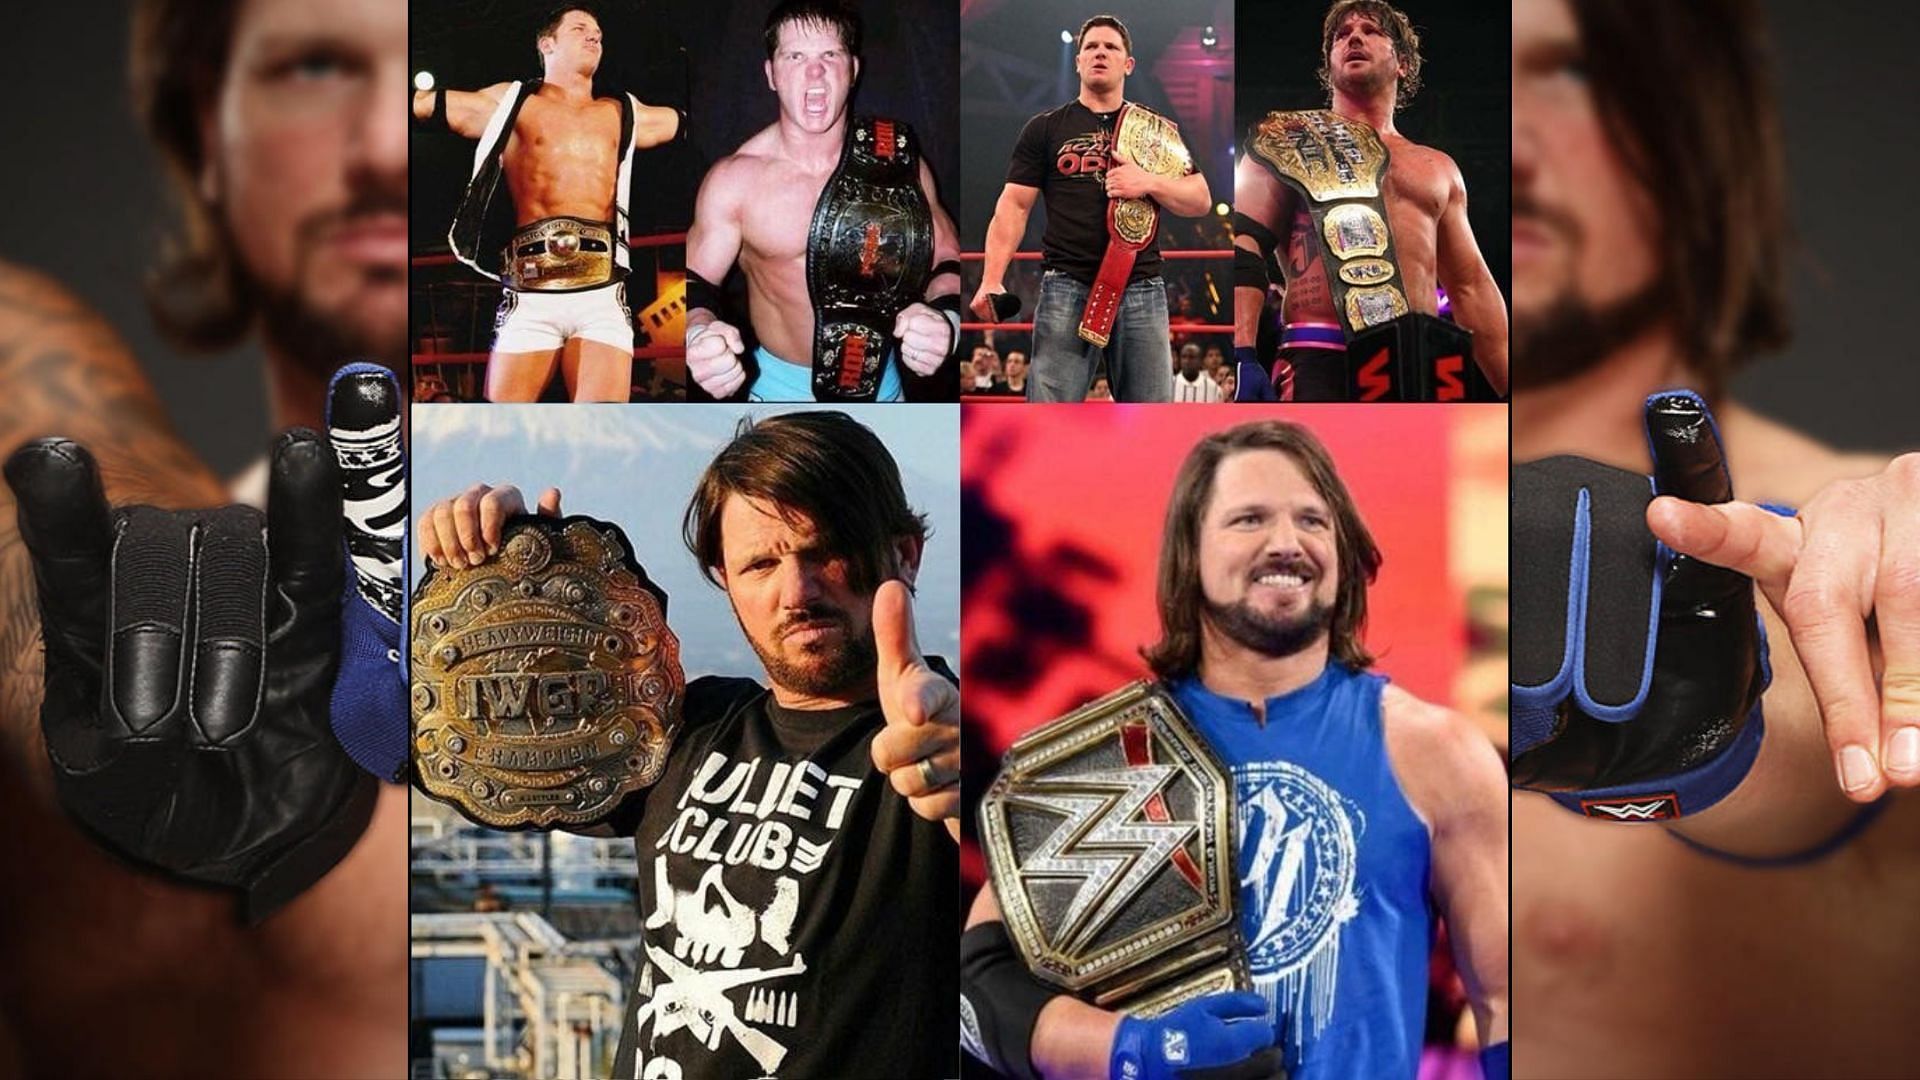 AJ Styles is debatably the greatest performer in all of sports entertainment today